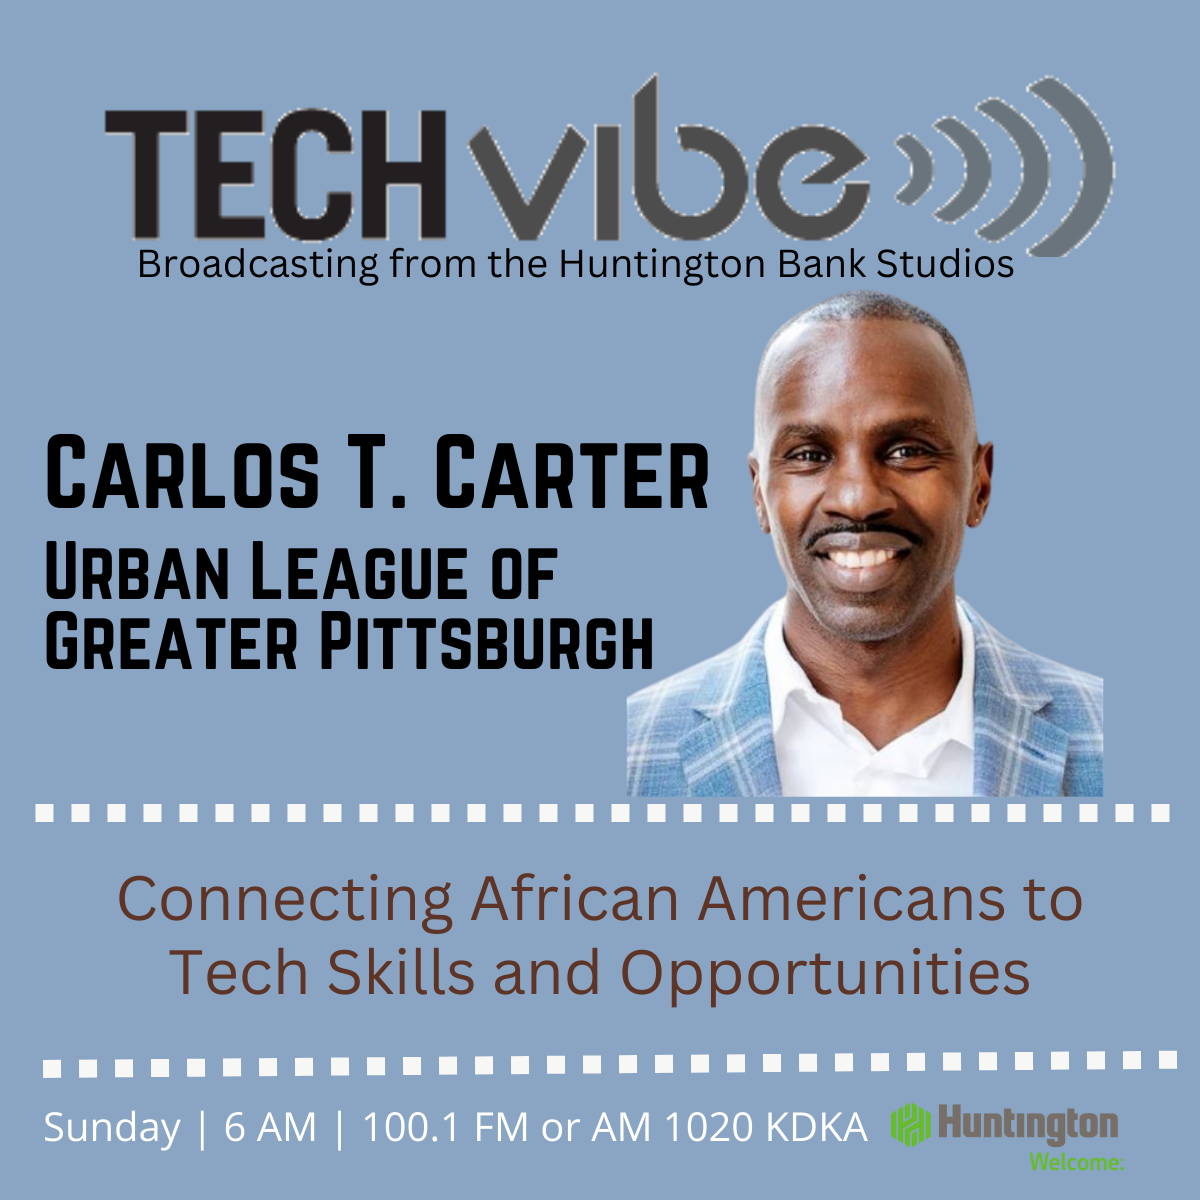 Carlos T. Carter, Urban League of Greater Pittsburgh